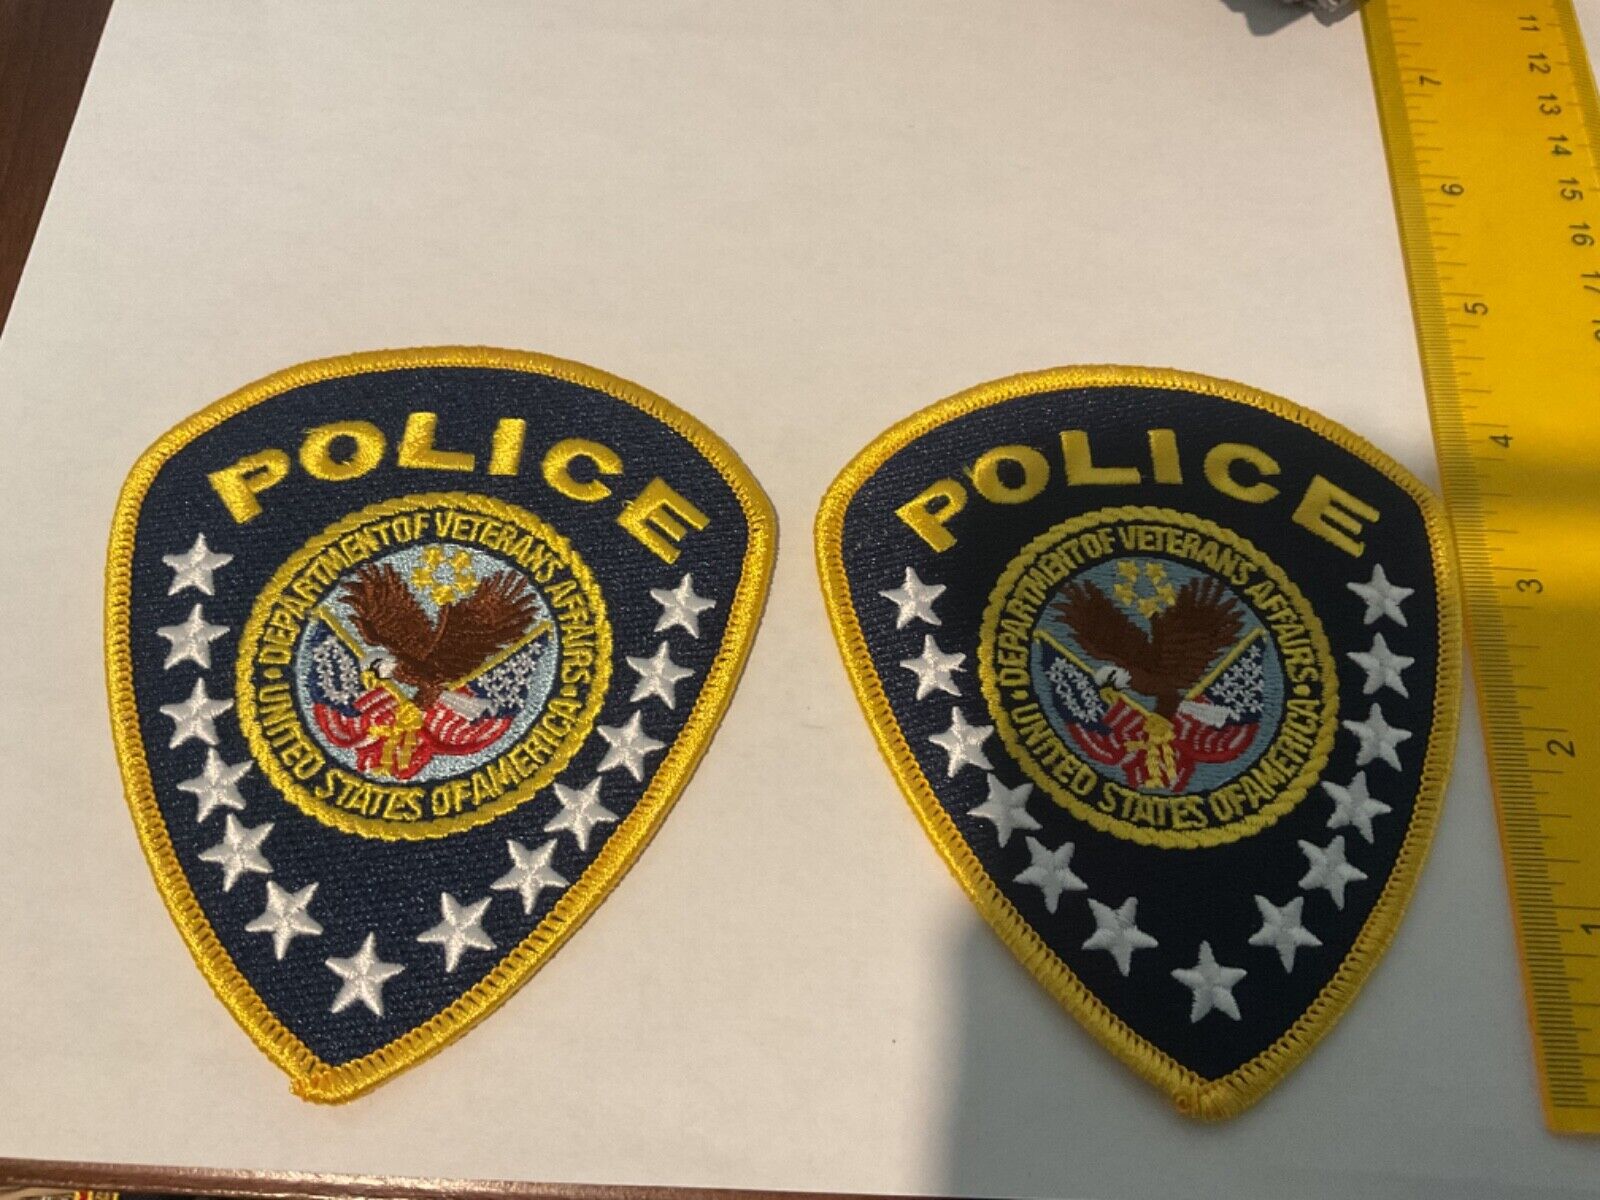 Police Department Of Veterans Affairs full size collectible patches 2 pieces